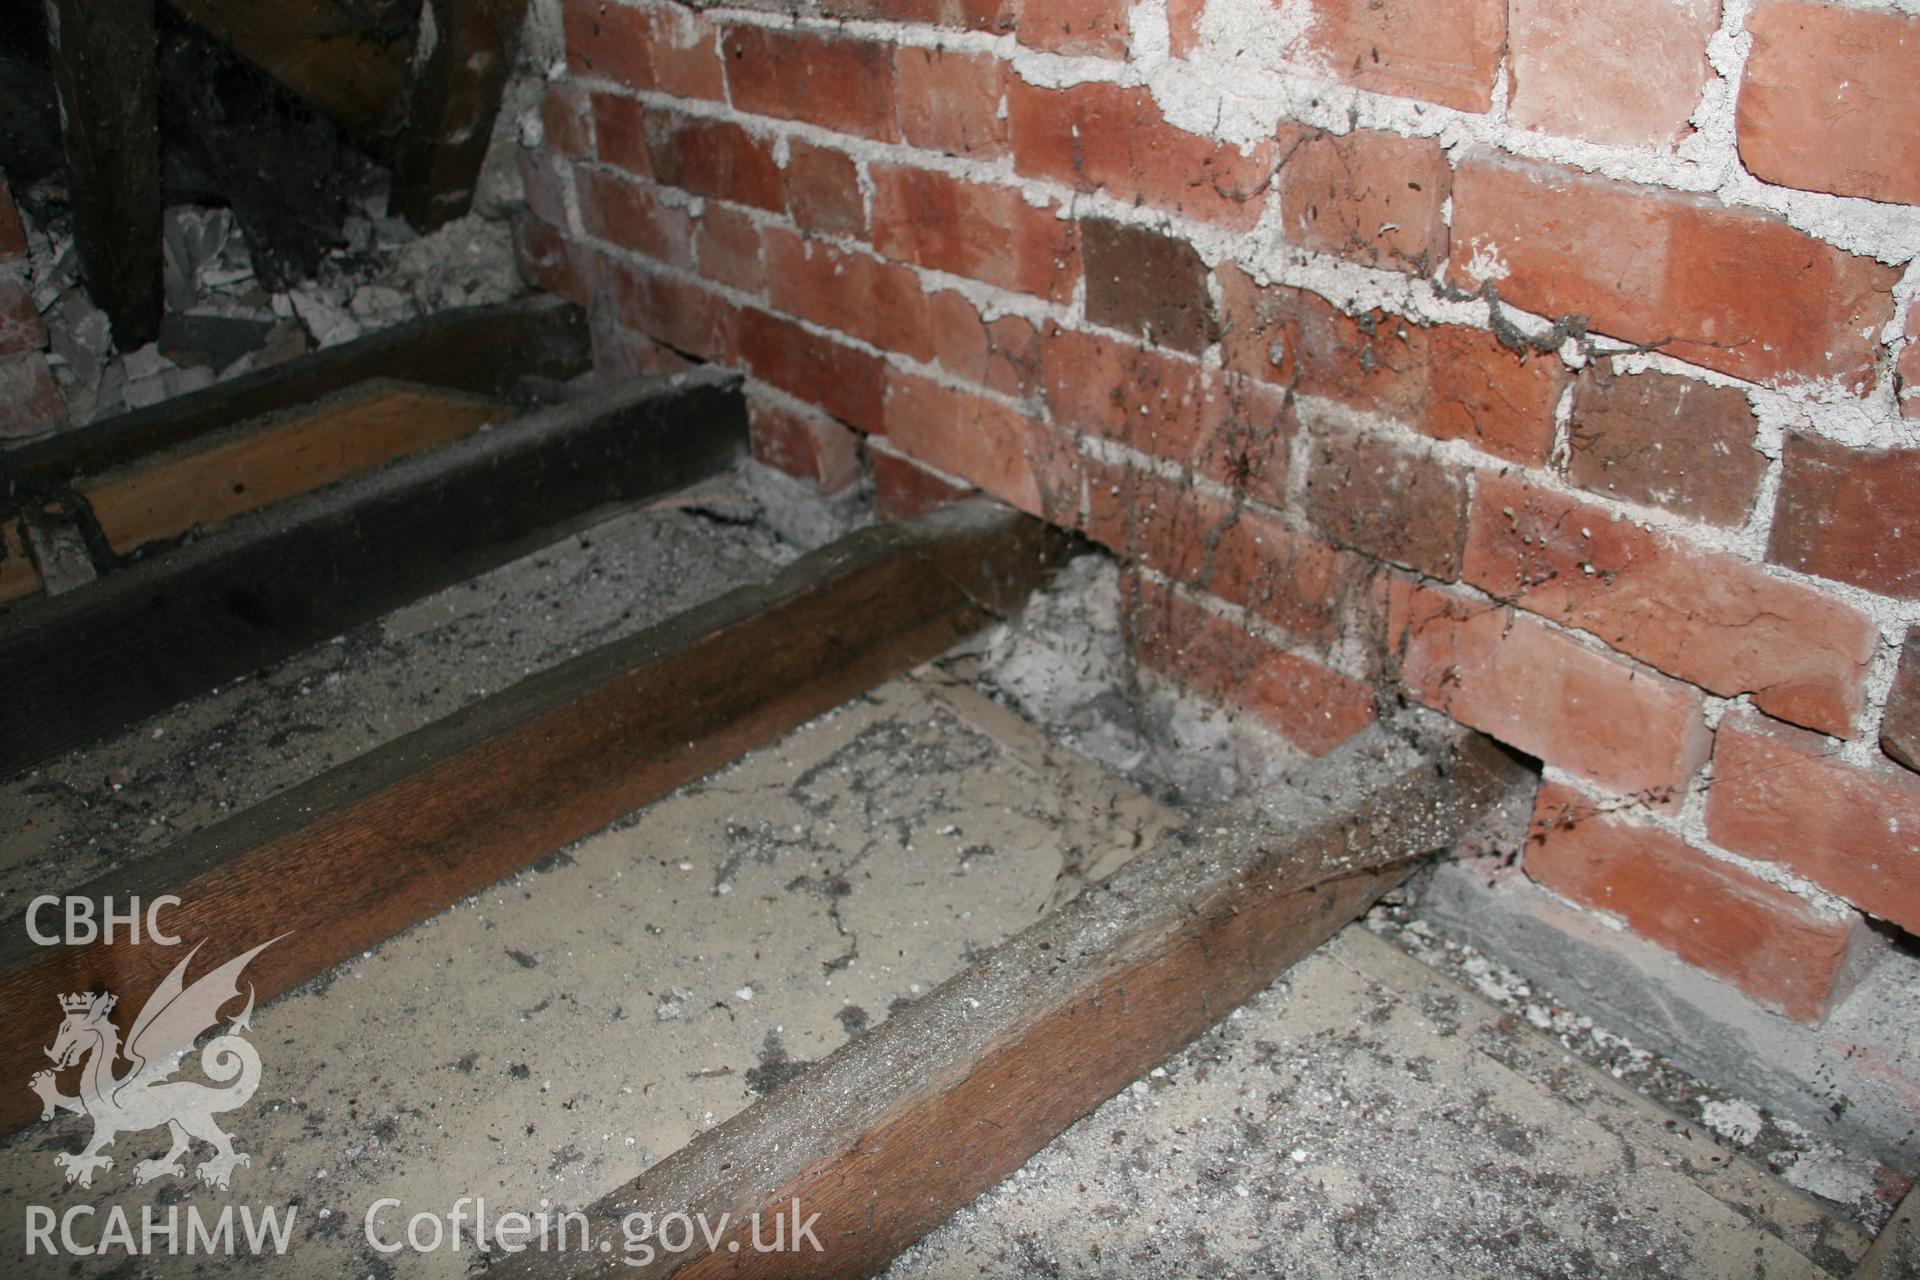 Photograph showing detailed interior view of brick wall and wooden beams in the loft of the former Llawrybettws Welsh Calvinistic Methodist chapel, Glanyrafon, Corwen. Taken by Tim Allen on 27/02/2019 to meet a condition attached to planning application.